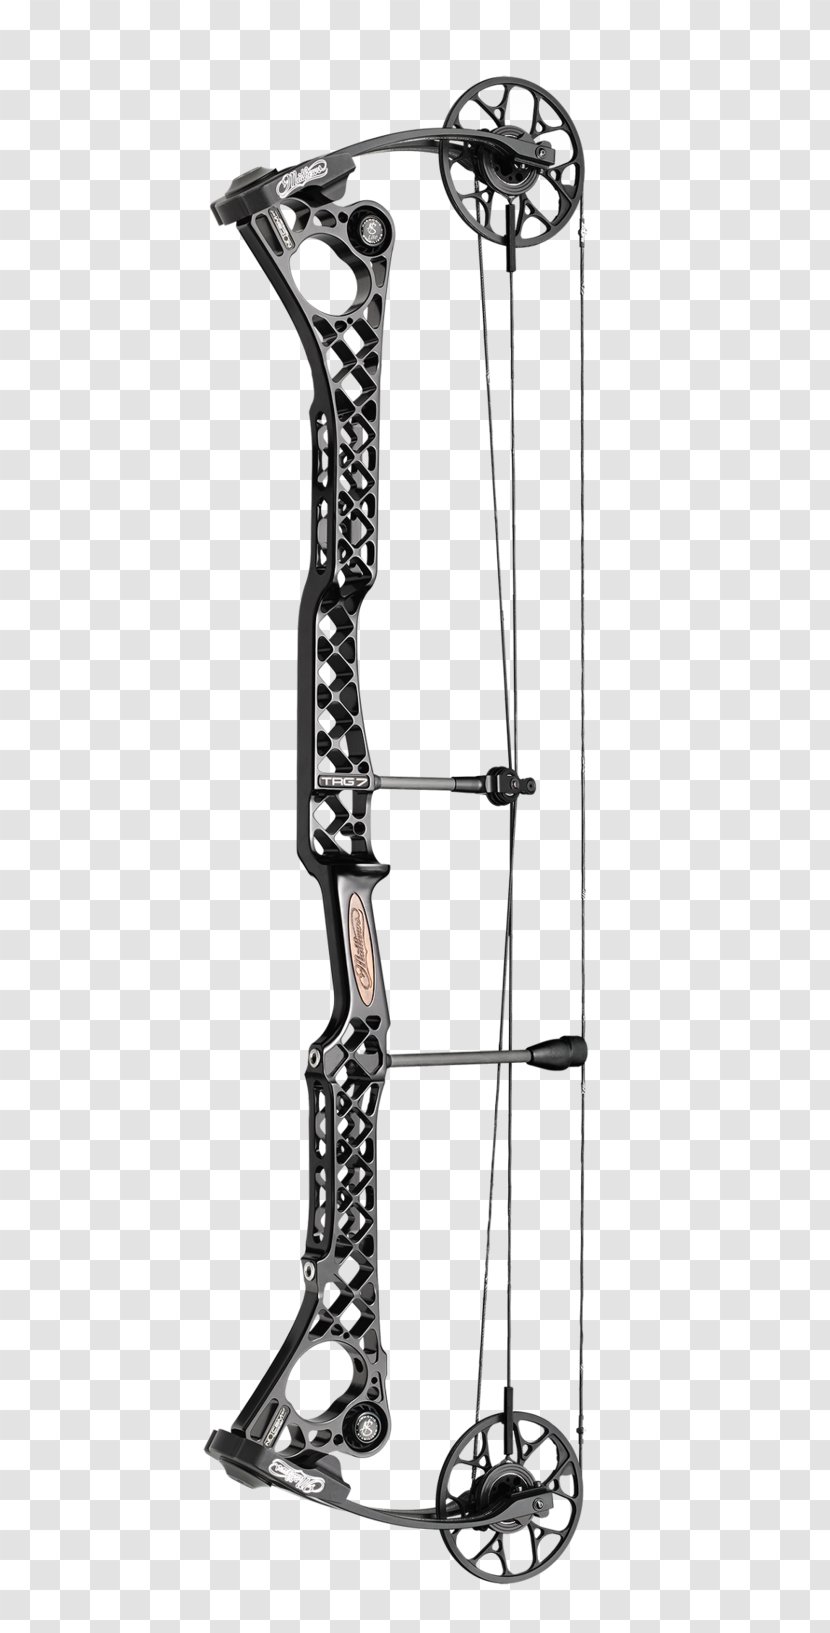 Bow And Arrow Compound Bows Bowhunting Archery - 7up Transparent PNG